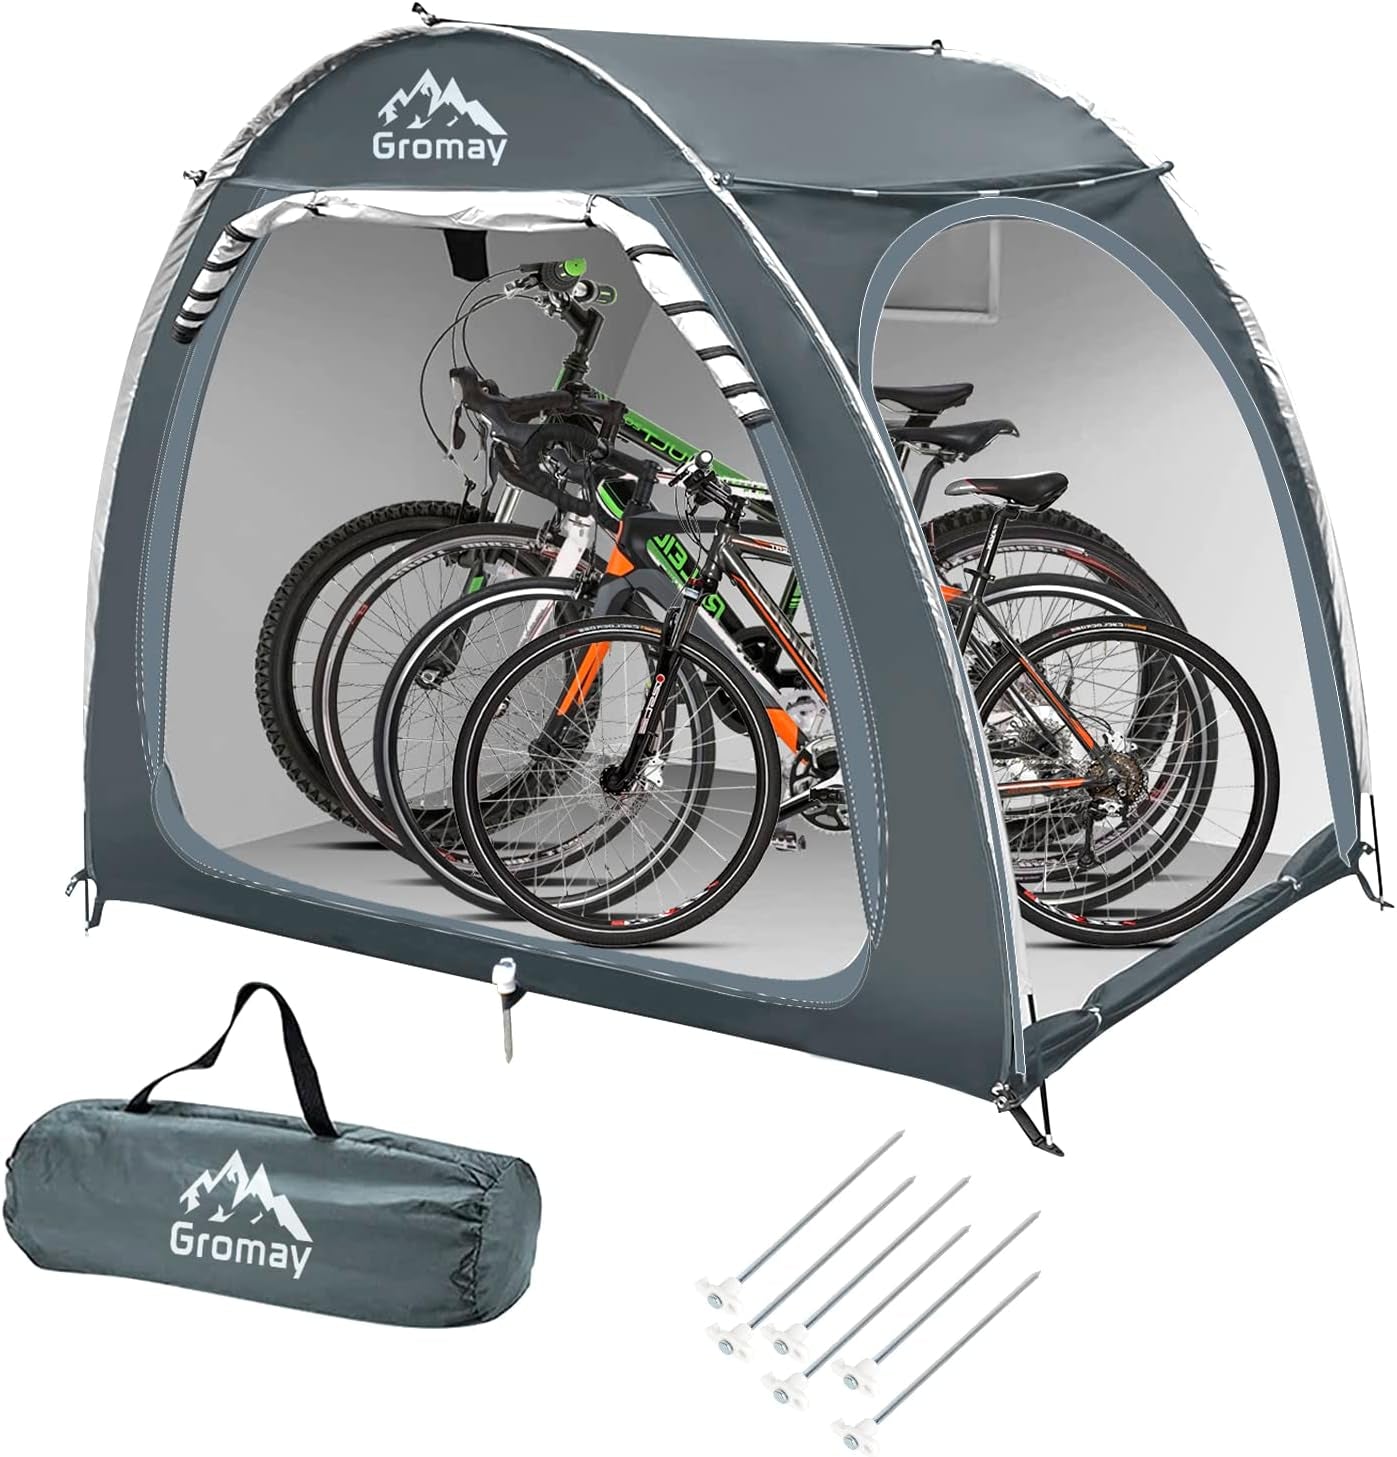 Portable Outdoor Bike Storage Shed Tent with Rain Strip for 4 Bikes, Waterproof Oxford Bike Cover Included